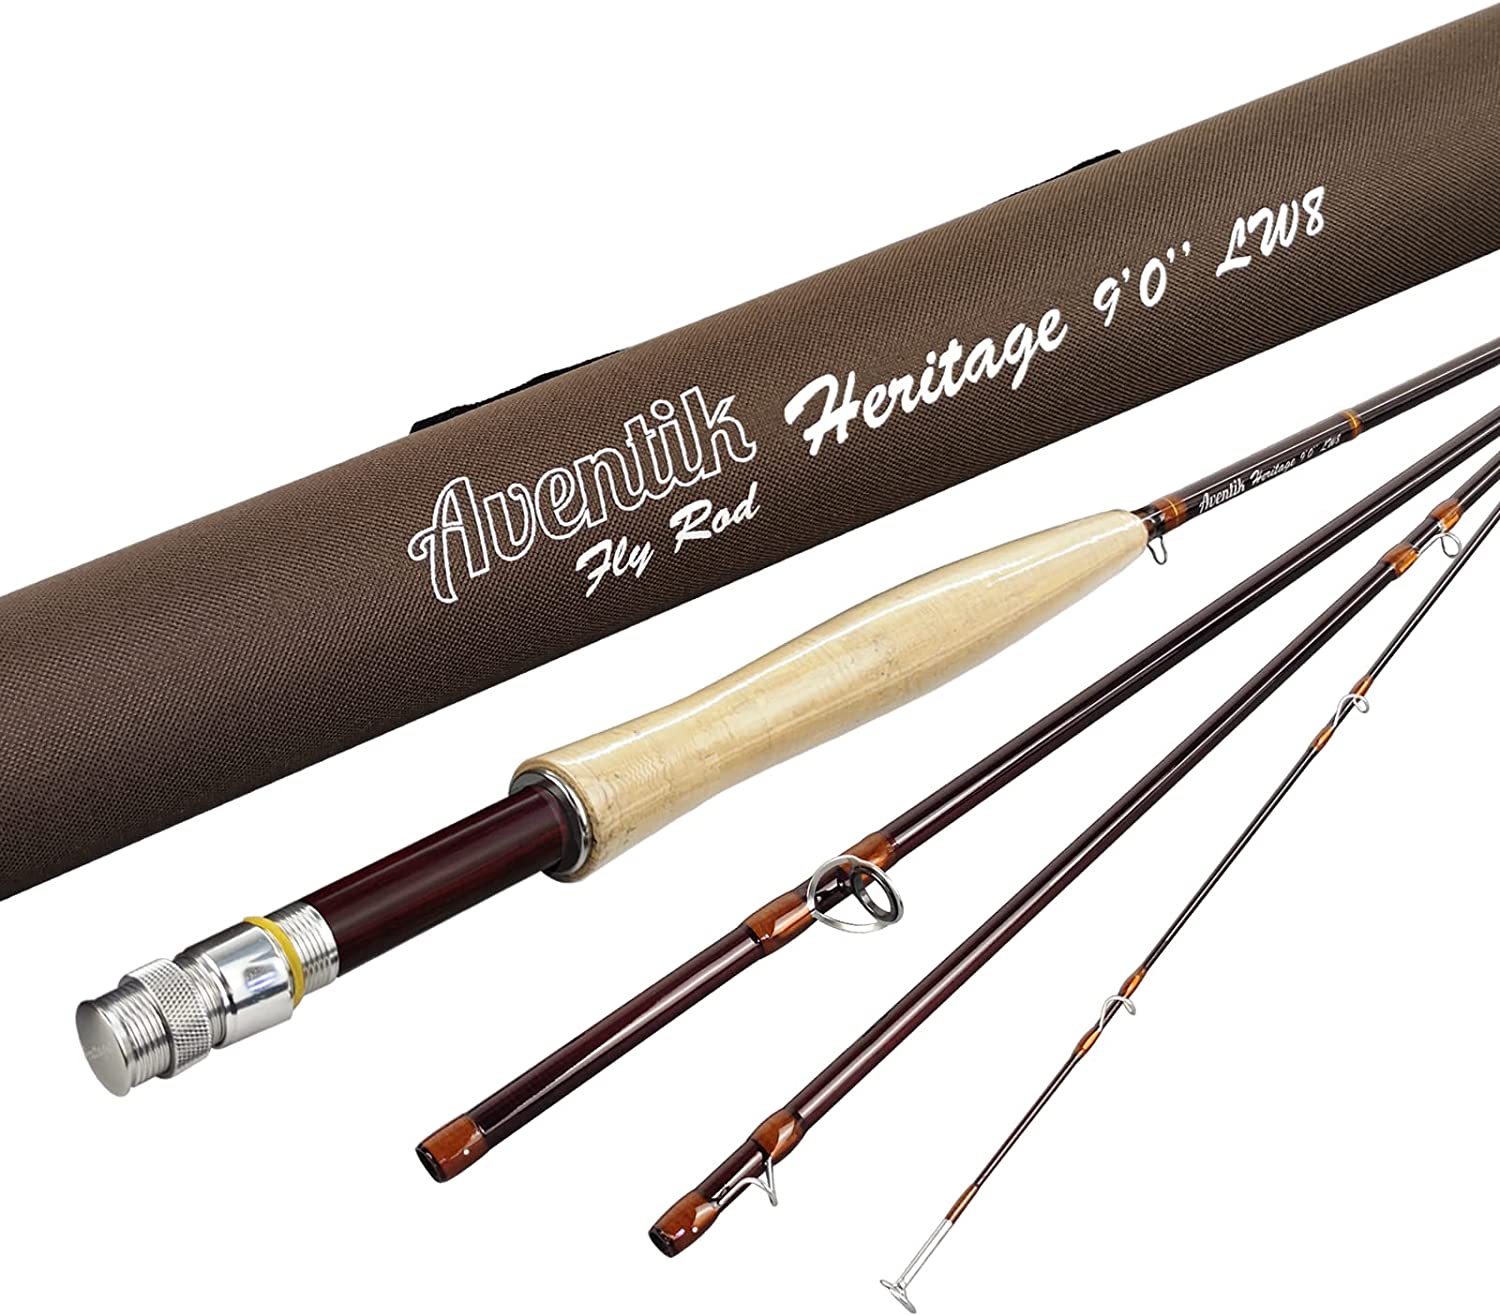 Aventik Heritage Fly Fishing Rod - 4 Pieces 9FT IM8 Carbon Blank